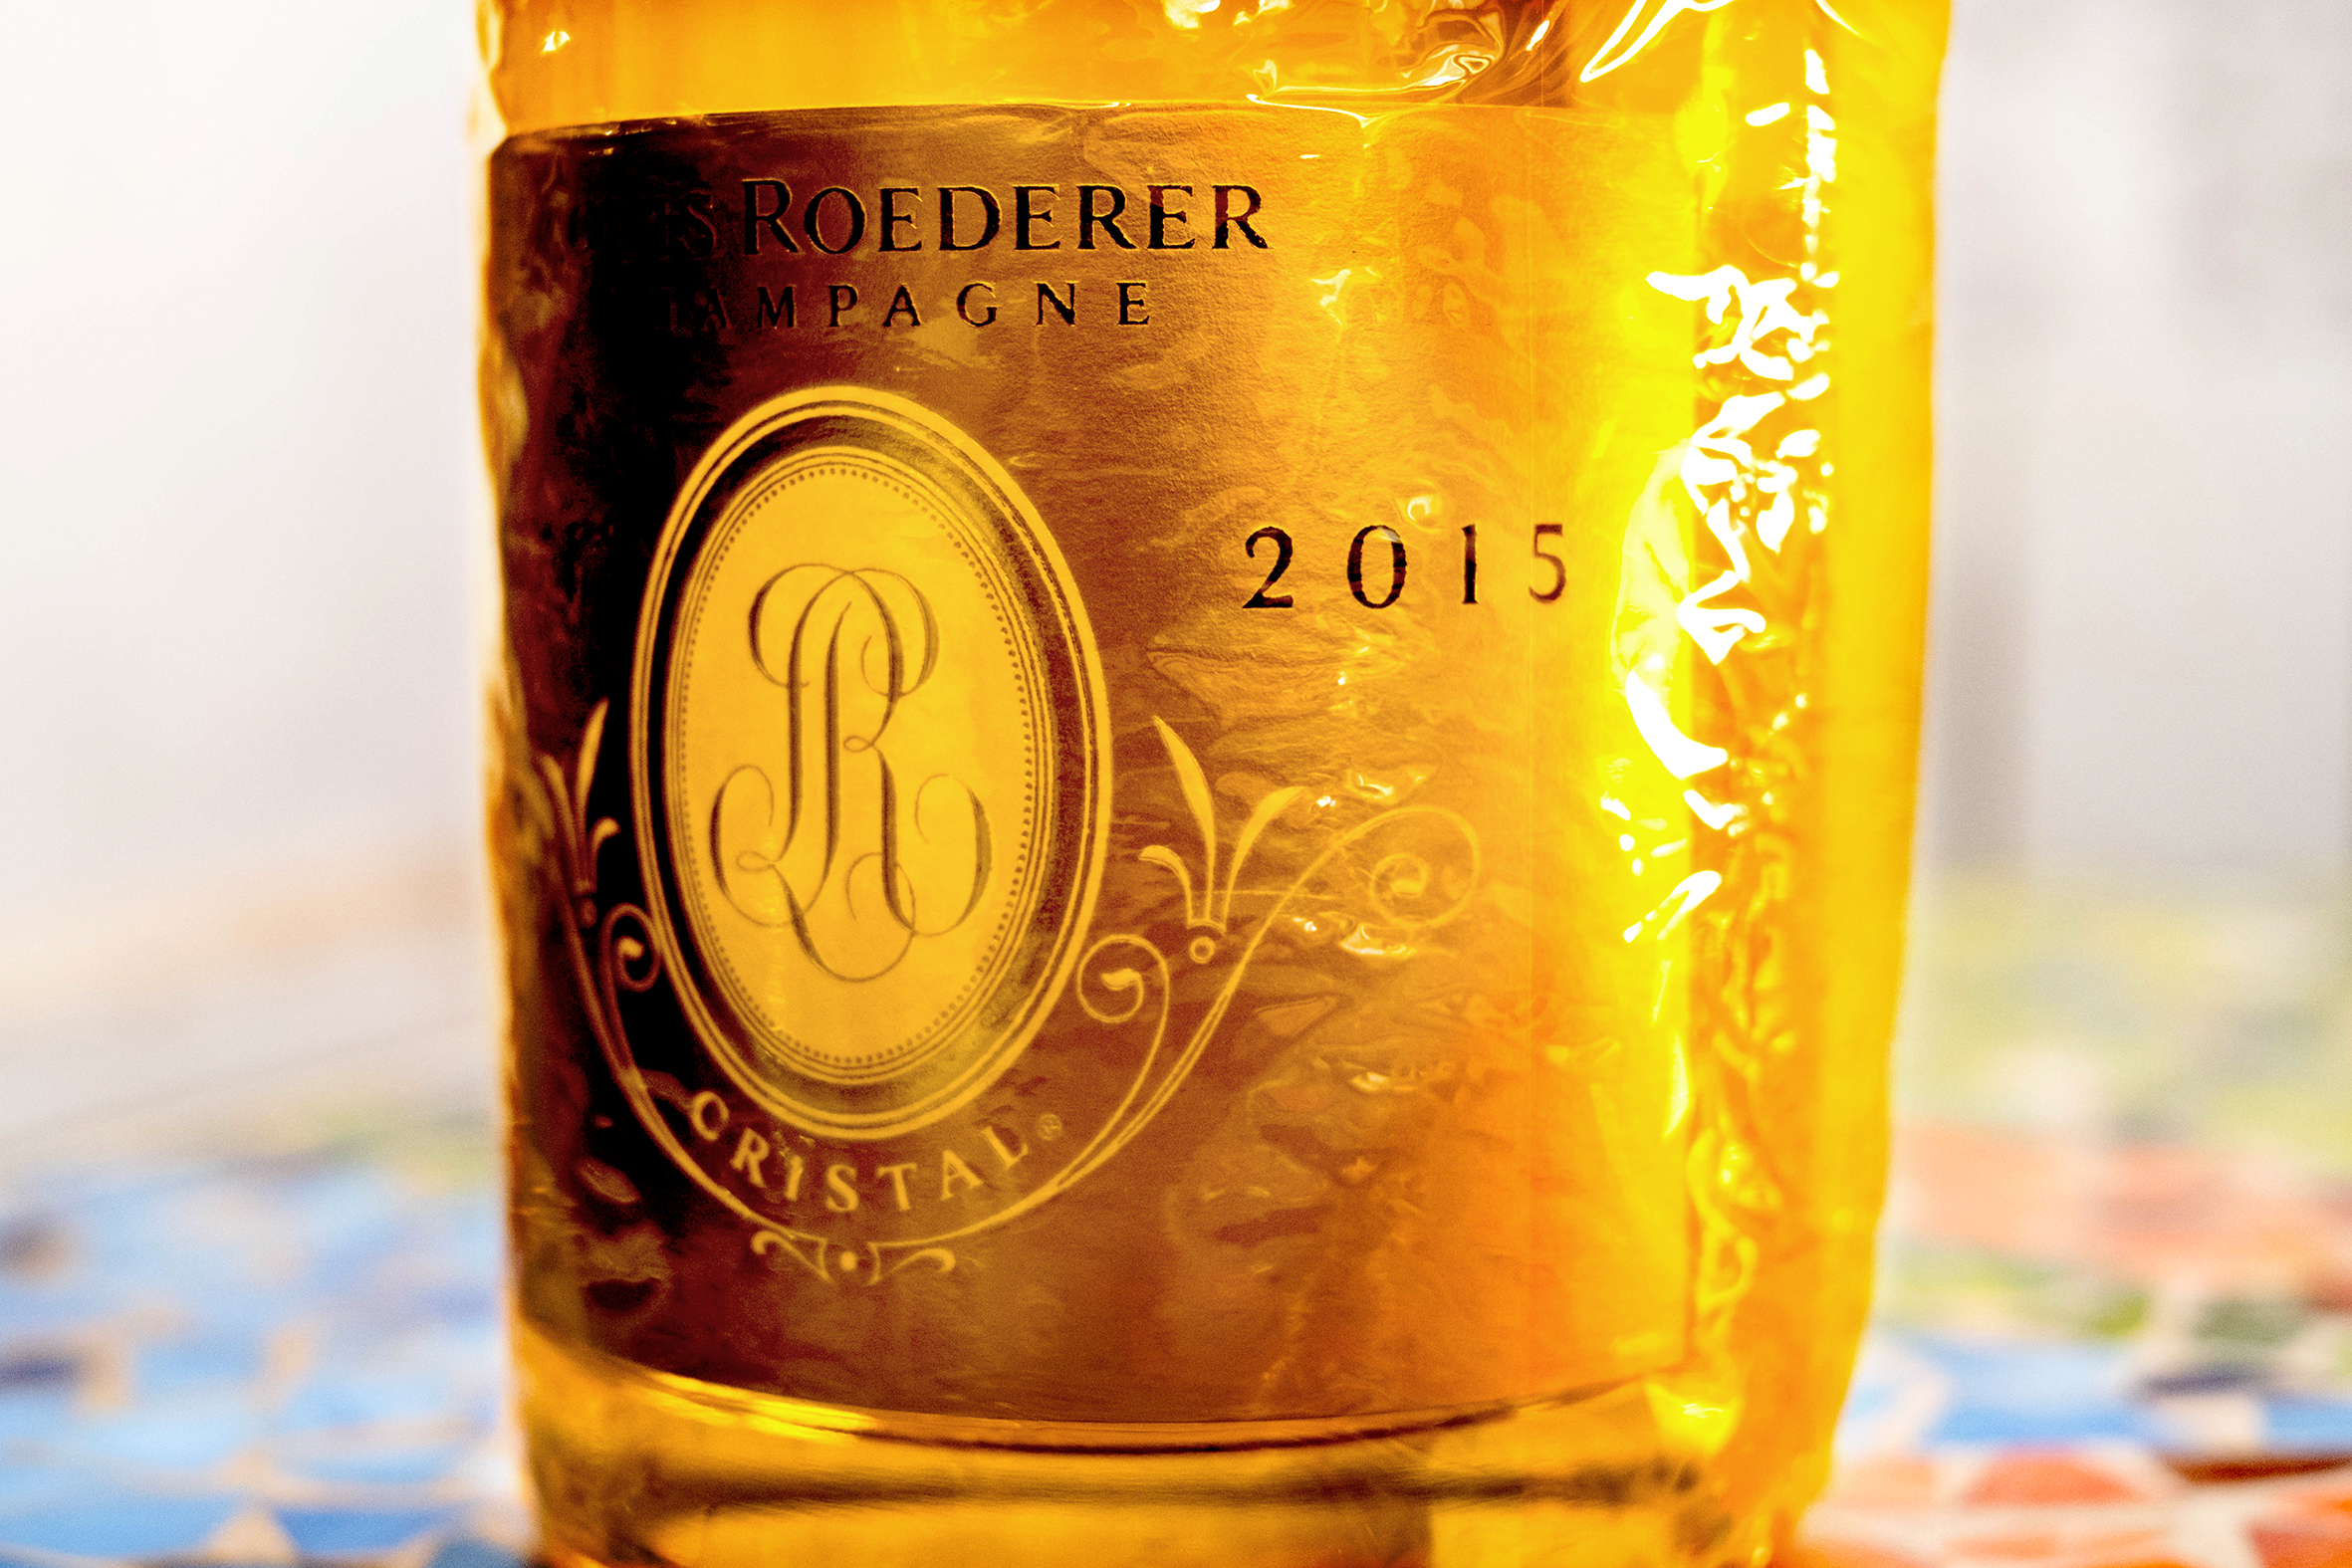 Cristal 2015  Champagne Louis Roederer